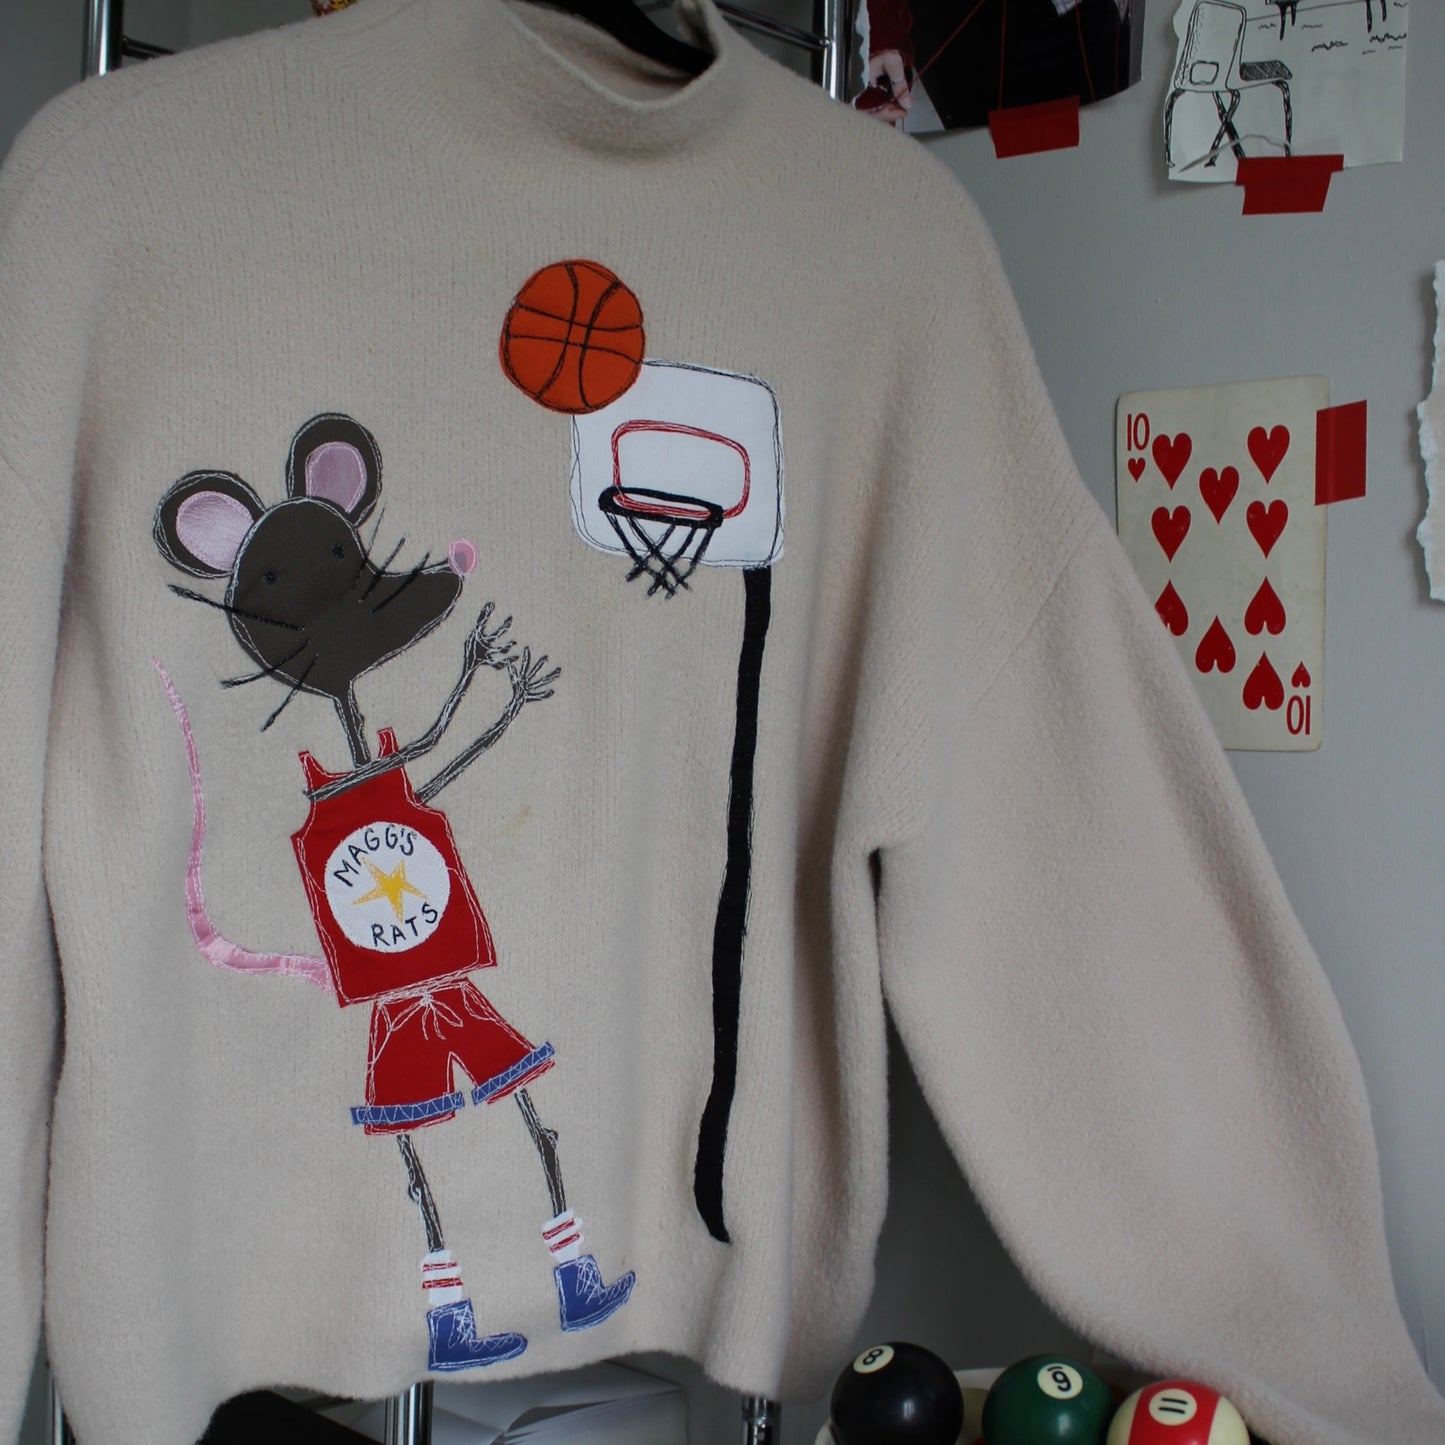 MAGG’S RATSketball sweater(small)